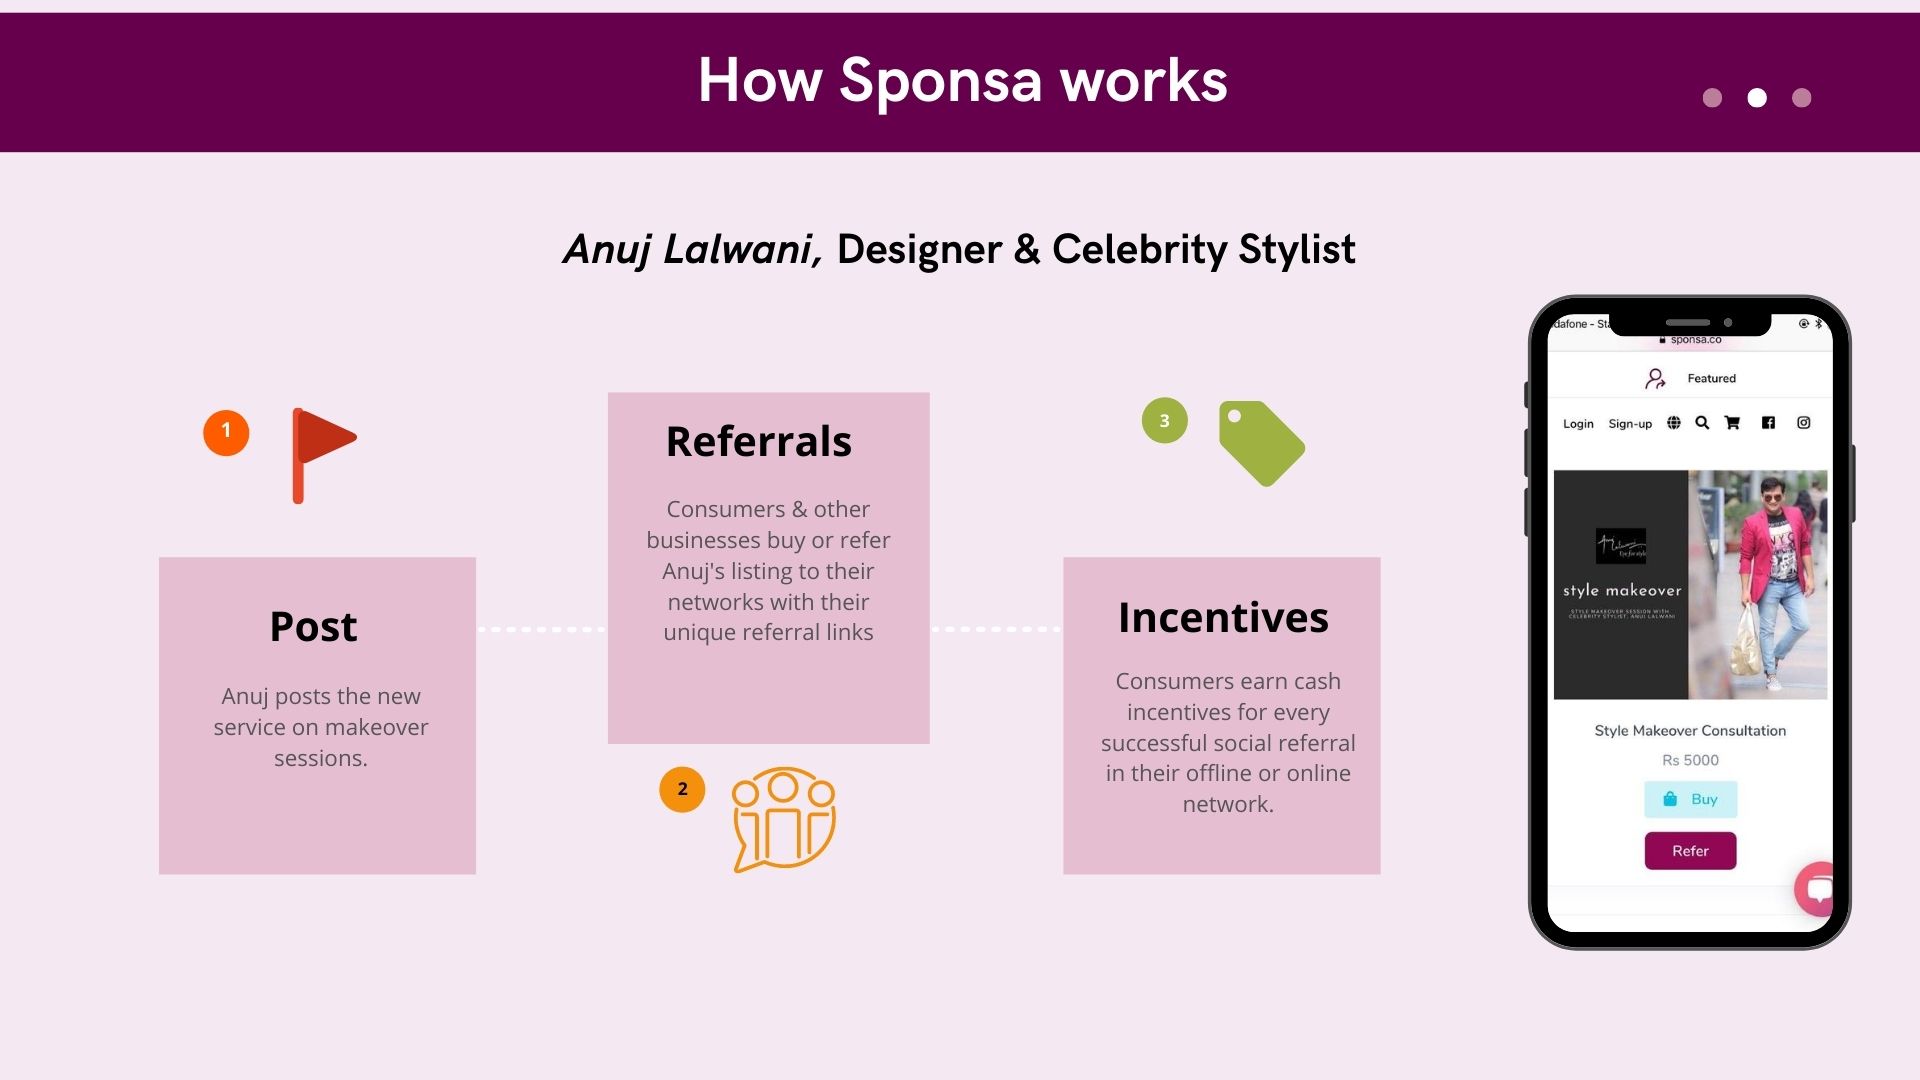 Sponsa – Bringing India’s Network Referrals Online Sponsa is a Made-in-India network commerce platform that is empowering individuals to grow their businesses with automated network referrals